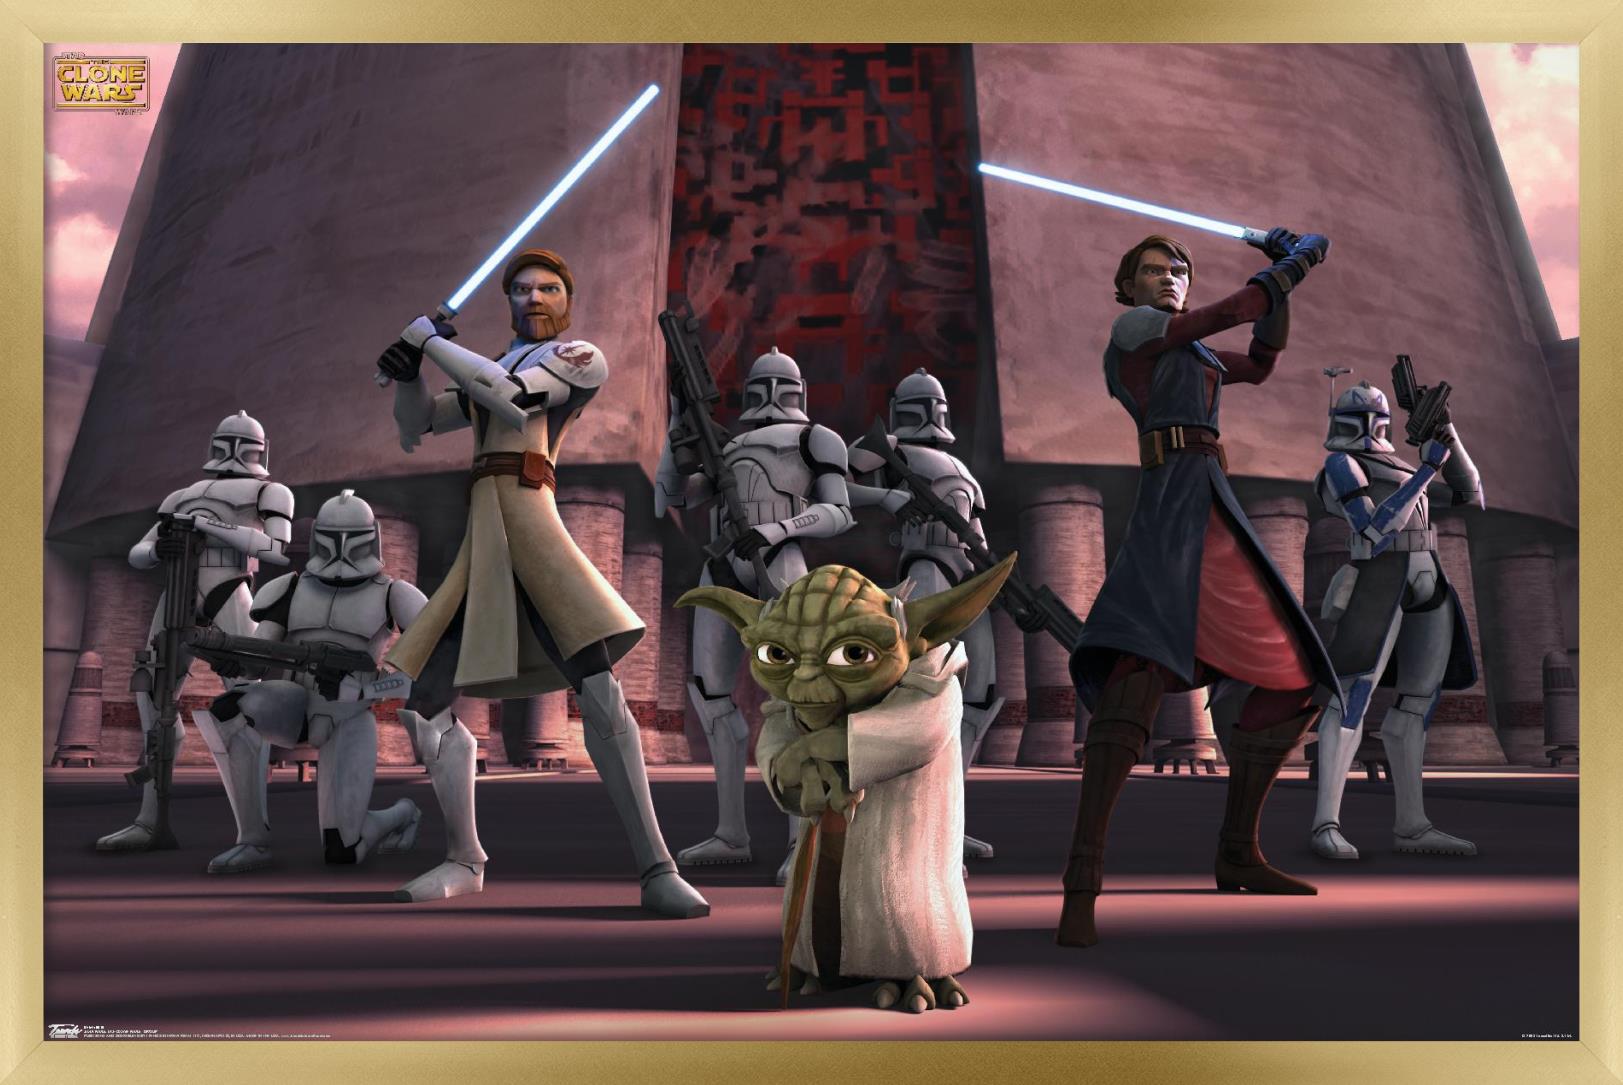 Star Wars: The Clone Wars - Group Wall Poster, 22.375" x 34", Framed - image 1 of 5